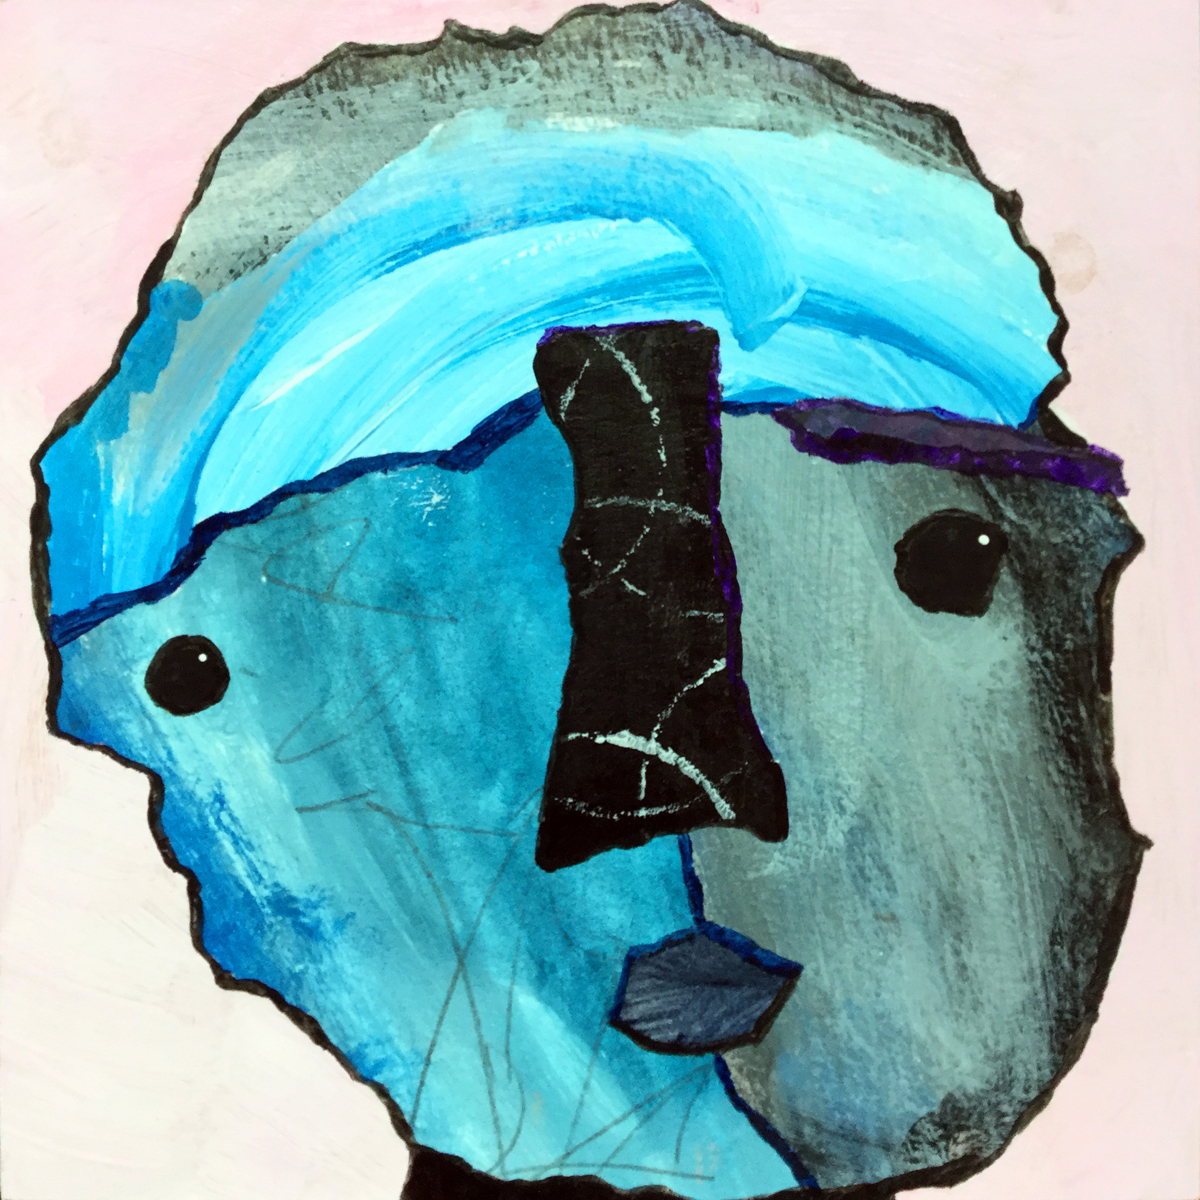 Mixed media collage of an abstract feminine face with wistful expression in blues and blacks on a pink background.